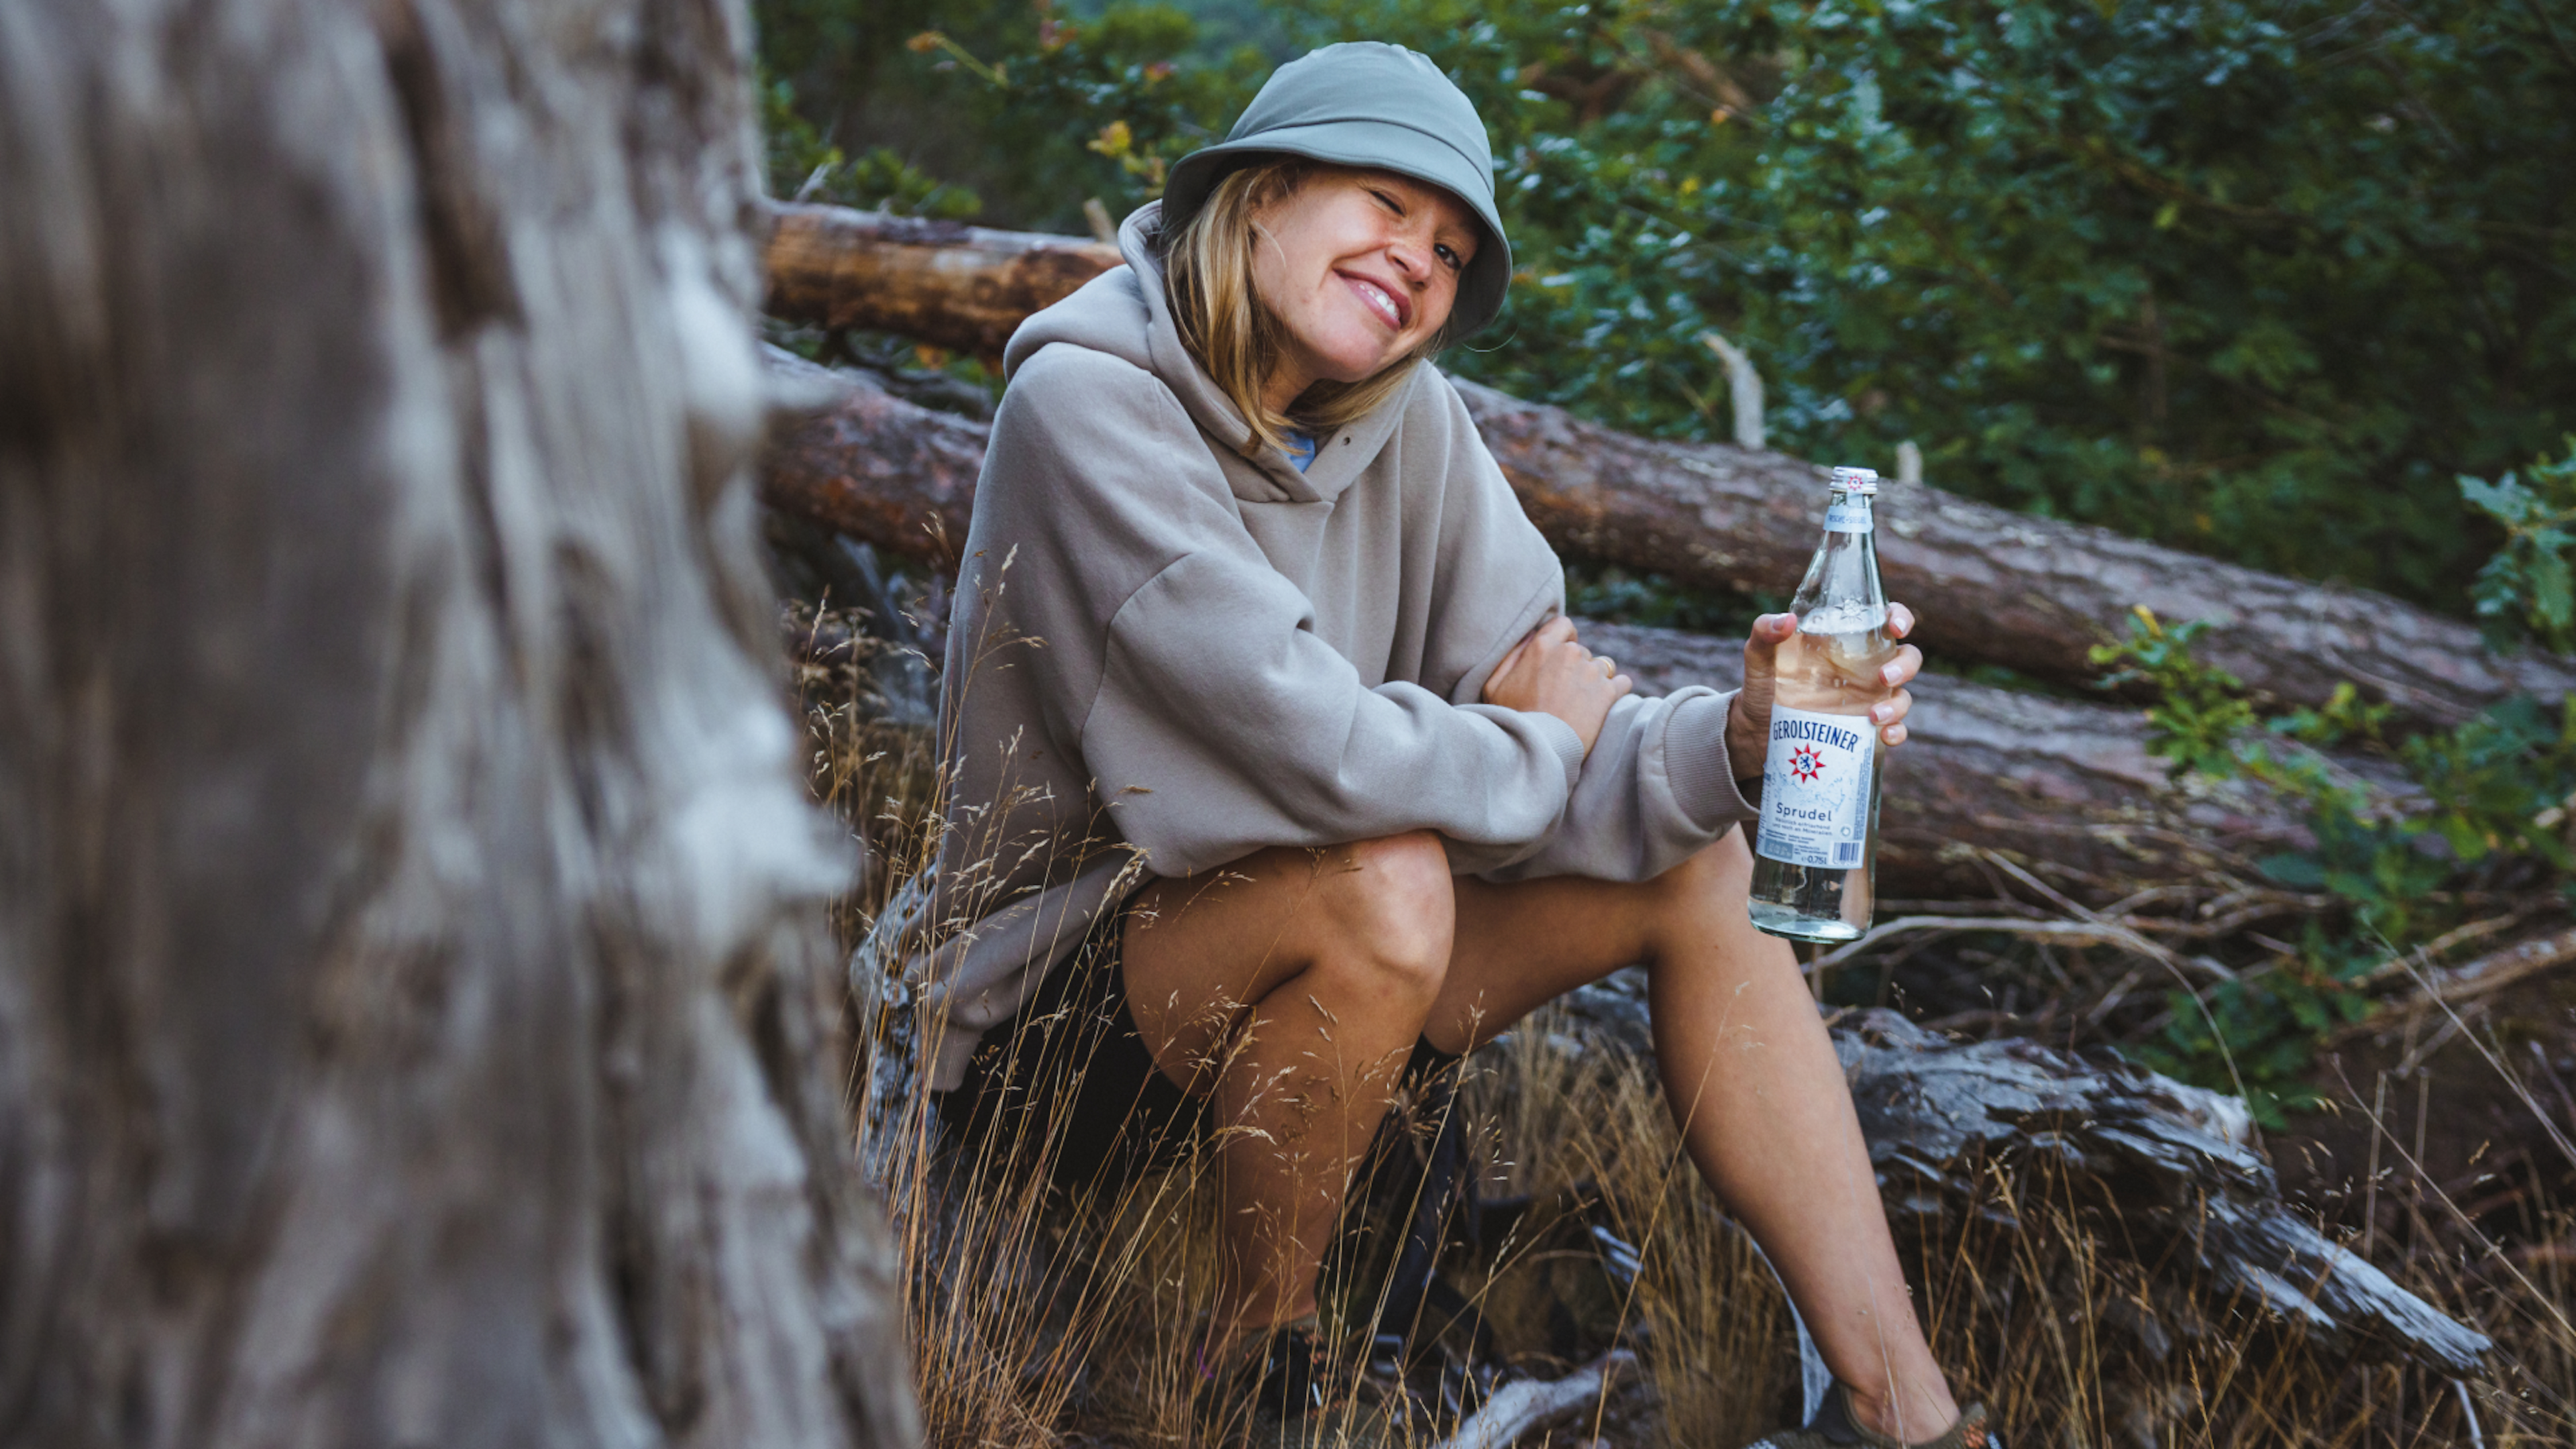 A woman sits on a tree trunk and smiles with a bottle of Gerolsteiner in her hand. 